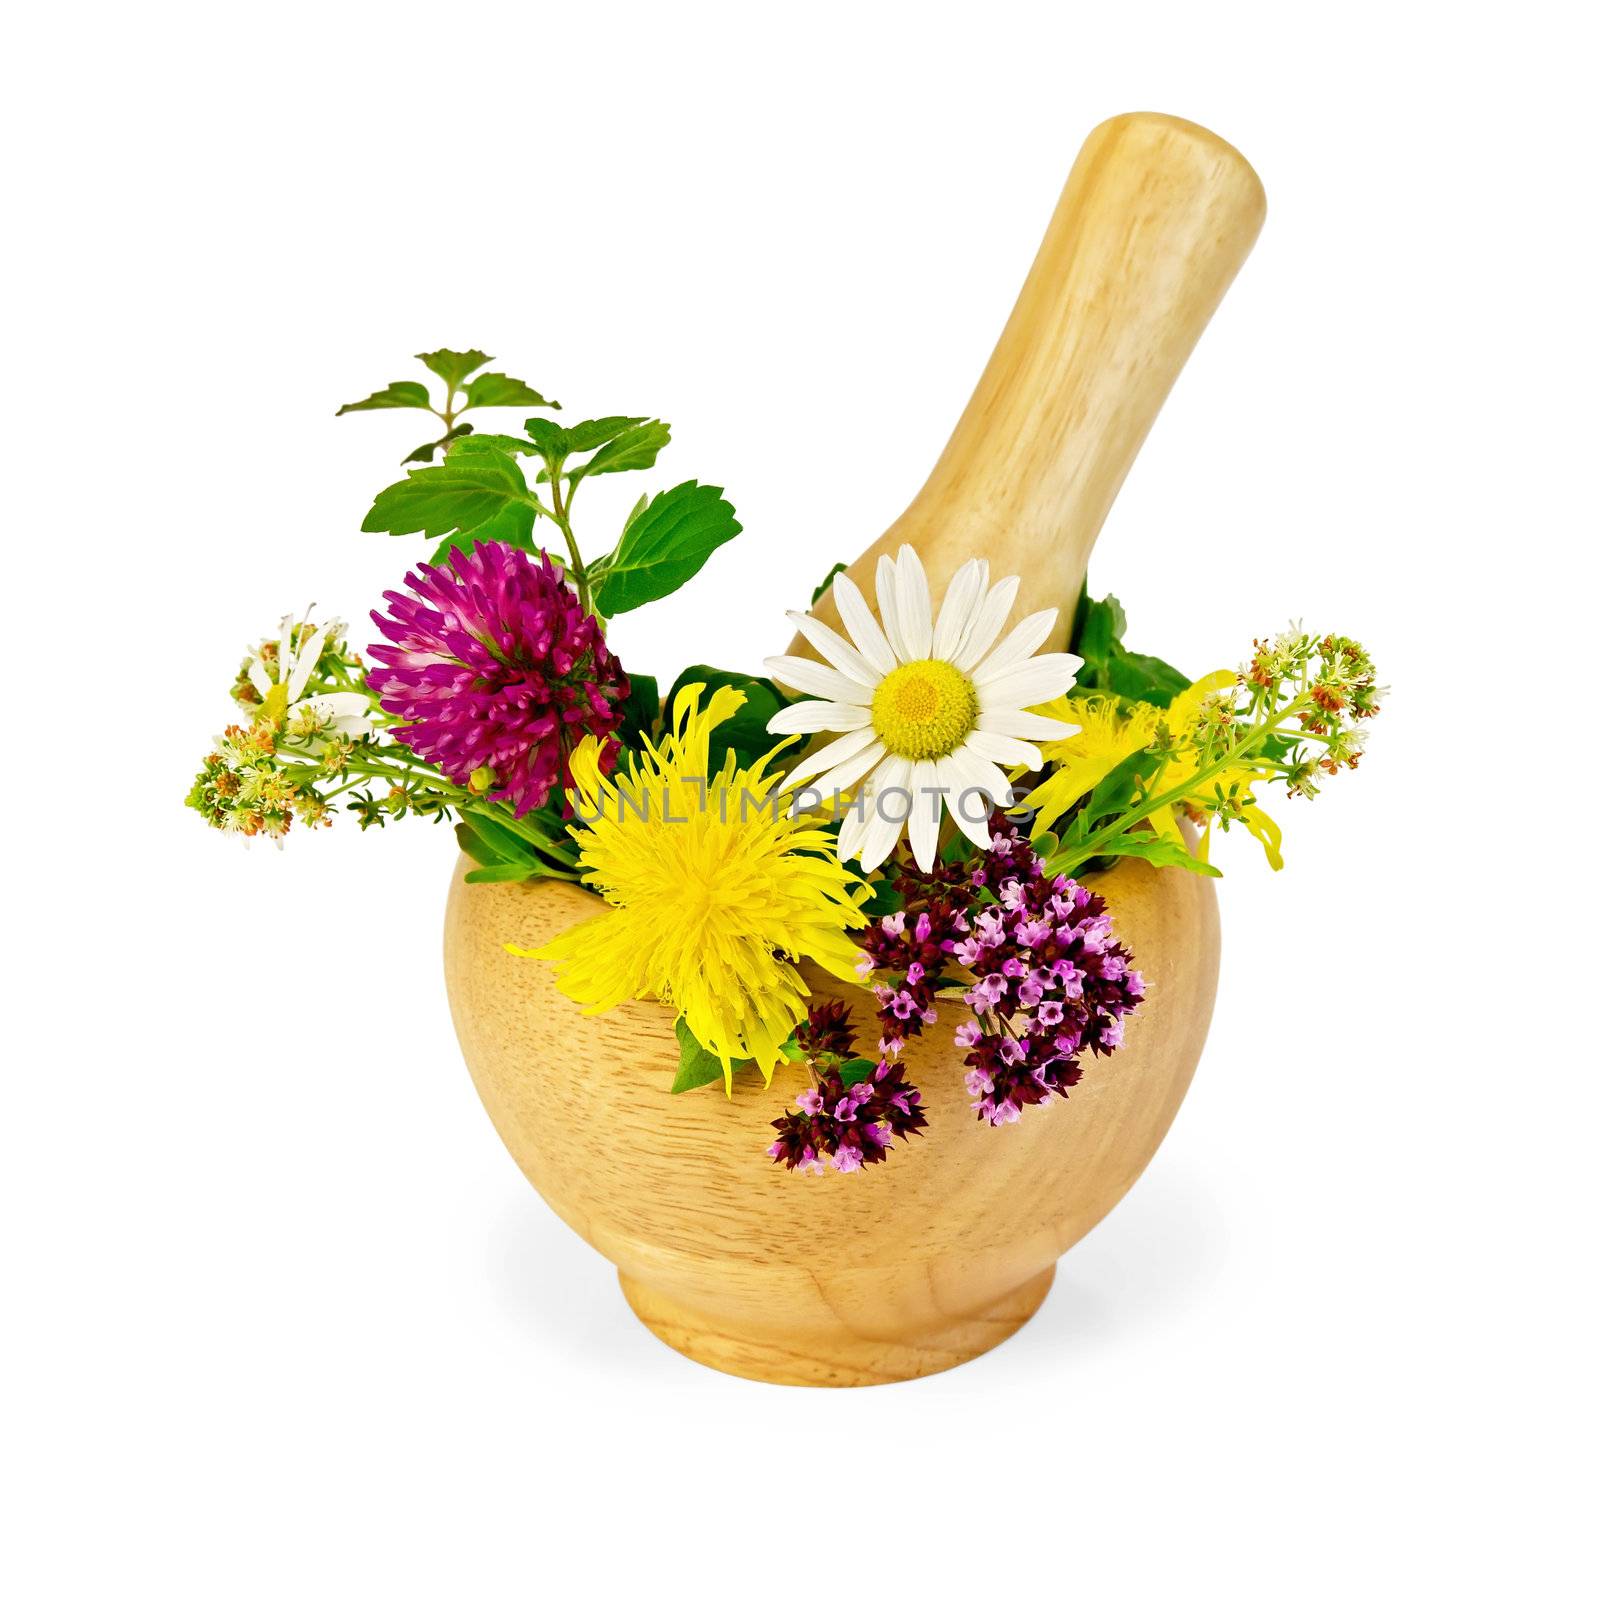 Mortar with a sprig of mint, flowers of chamomile, clover, oregano, mignonette, elecampane isolated on white background